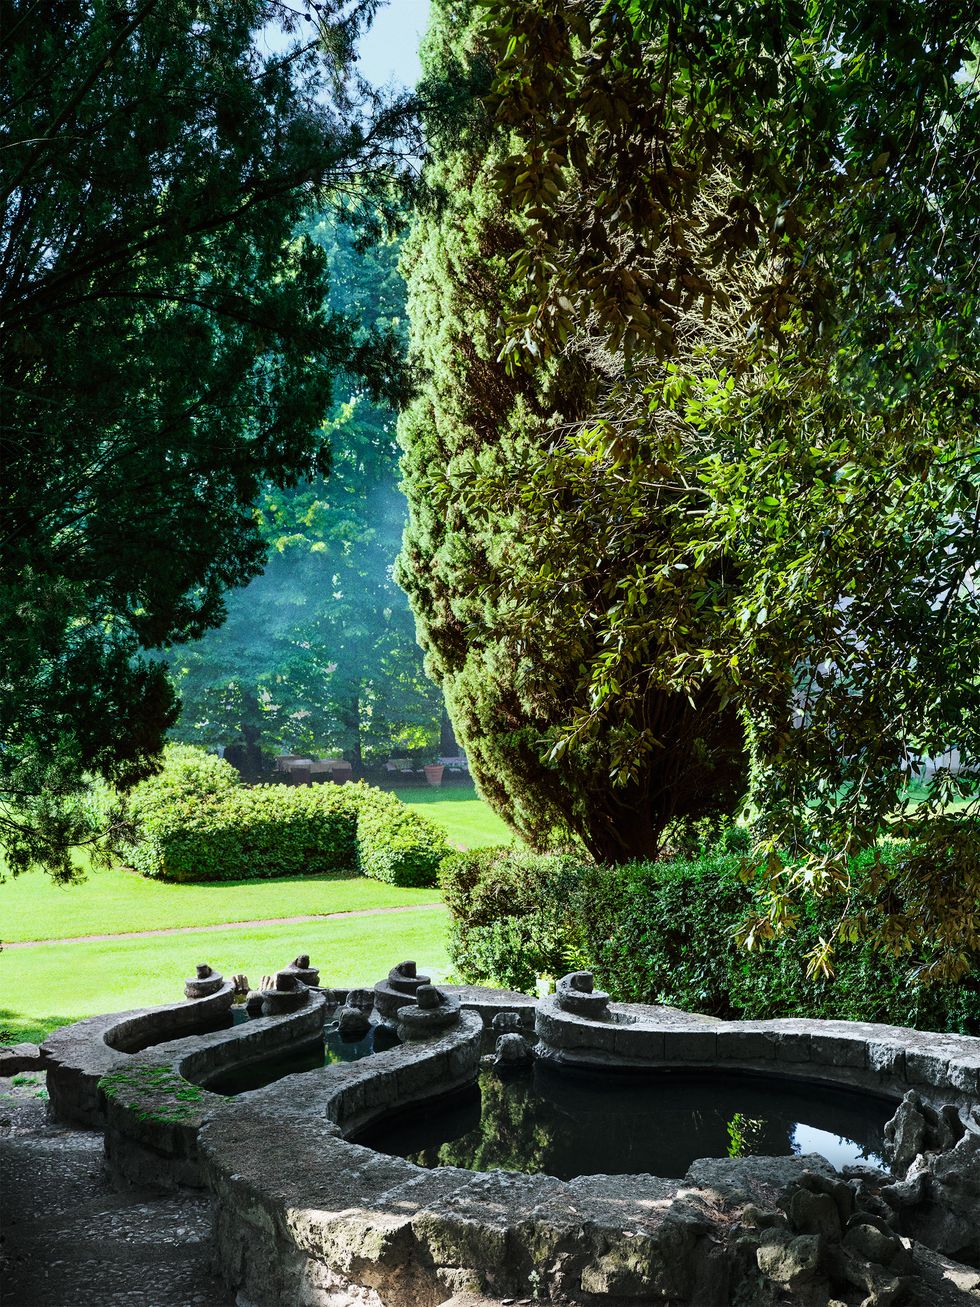 in the foreground is a stone waterfall fountain next to shrubs and cypresses of varying heights, and in the background is a lawn with shrubs and benches and potted plants backed by a line of tall trees